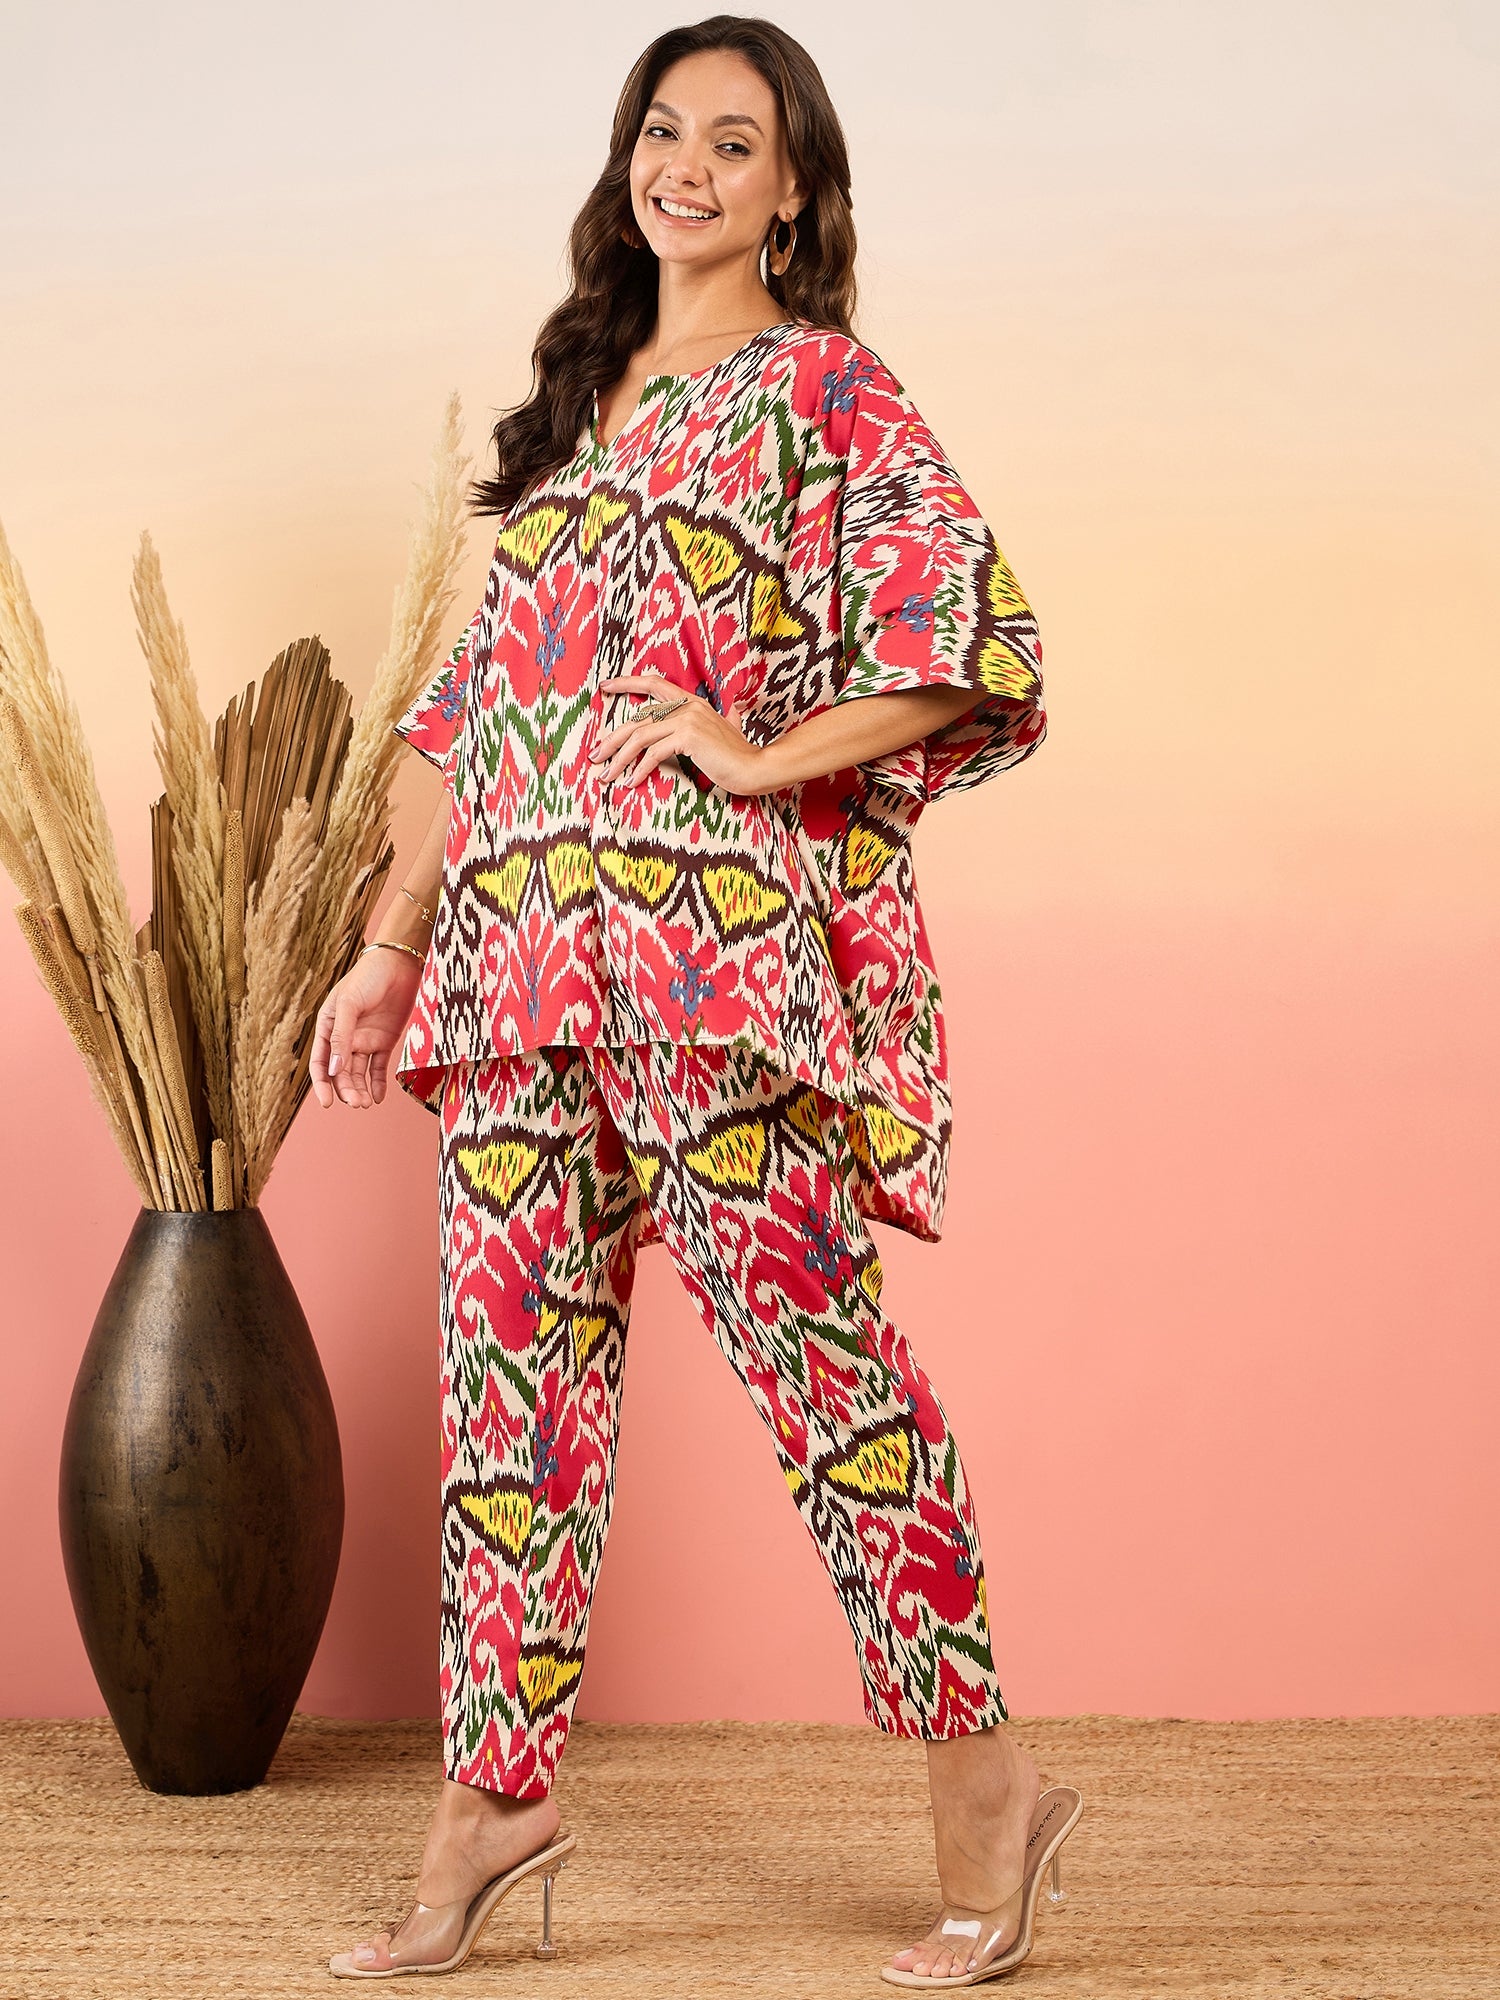 Anti Fit Kaftan Top with Pants in Red and Cream Ikkat Print